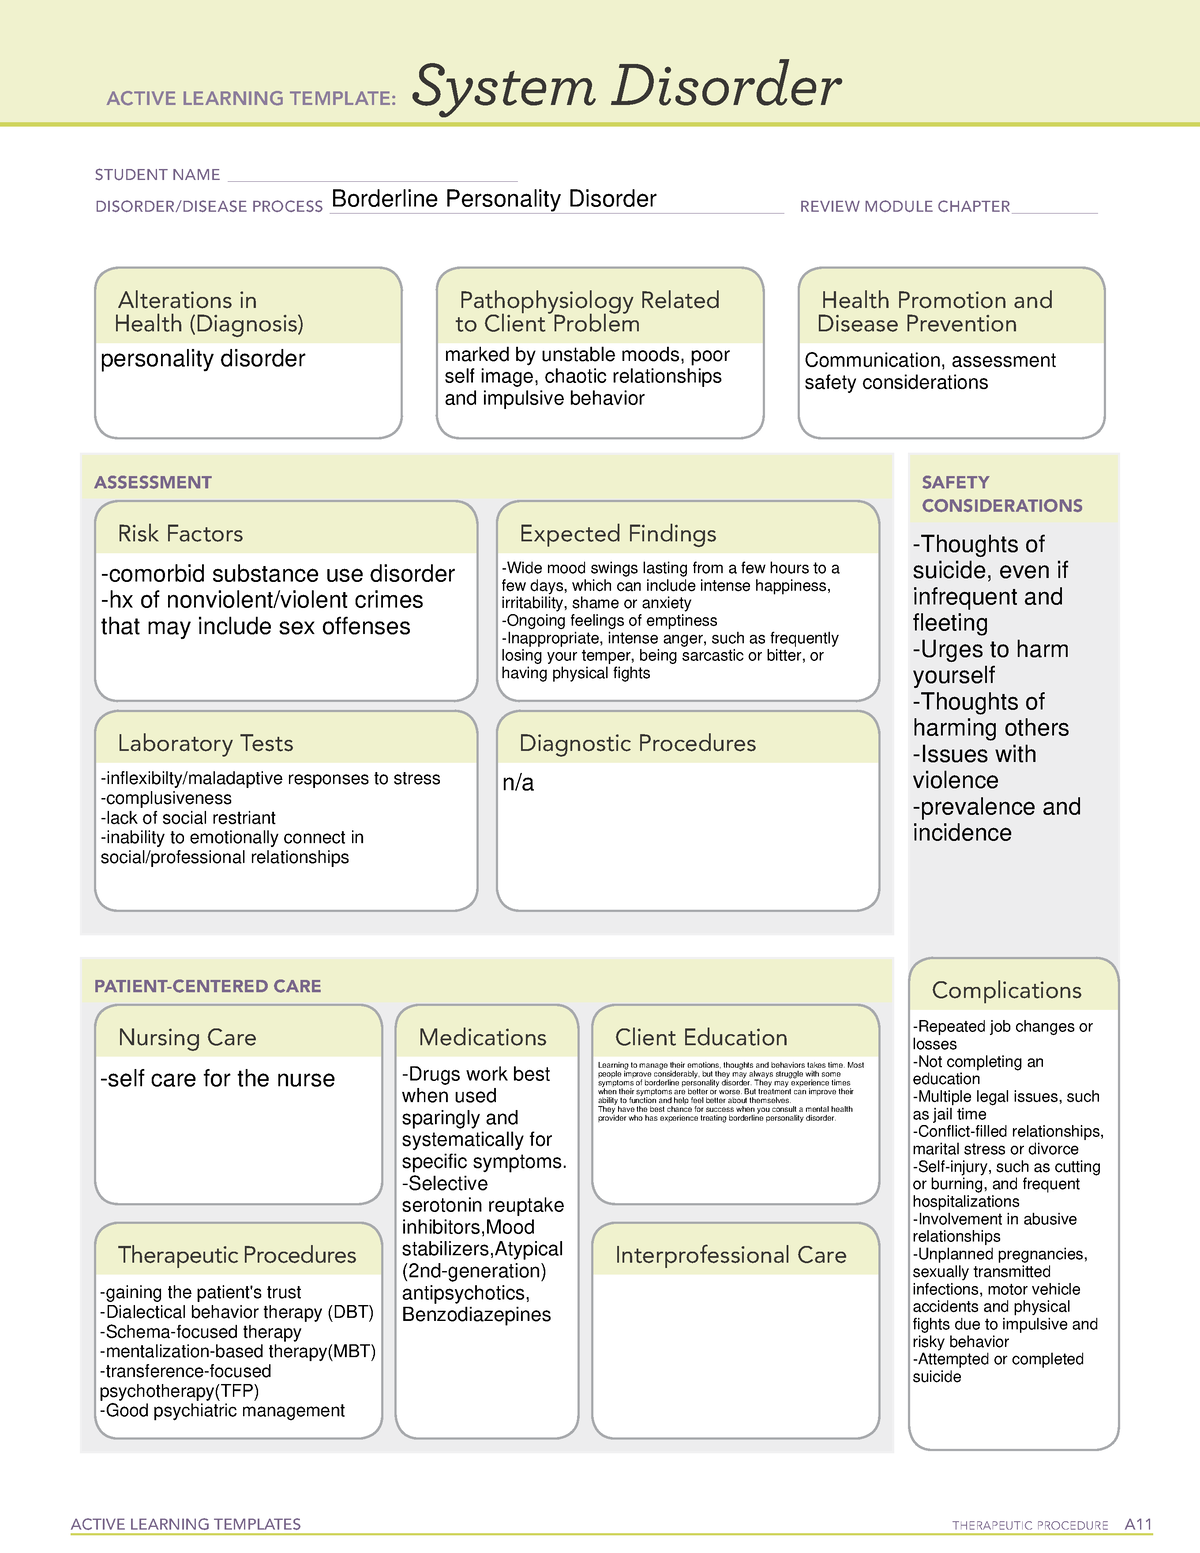 system-disorder-bpd-ati-active-learning-template-active-learning-templates-therapeutic